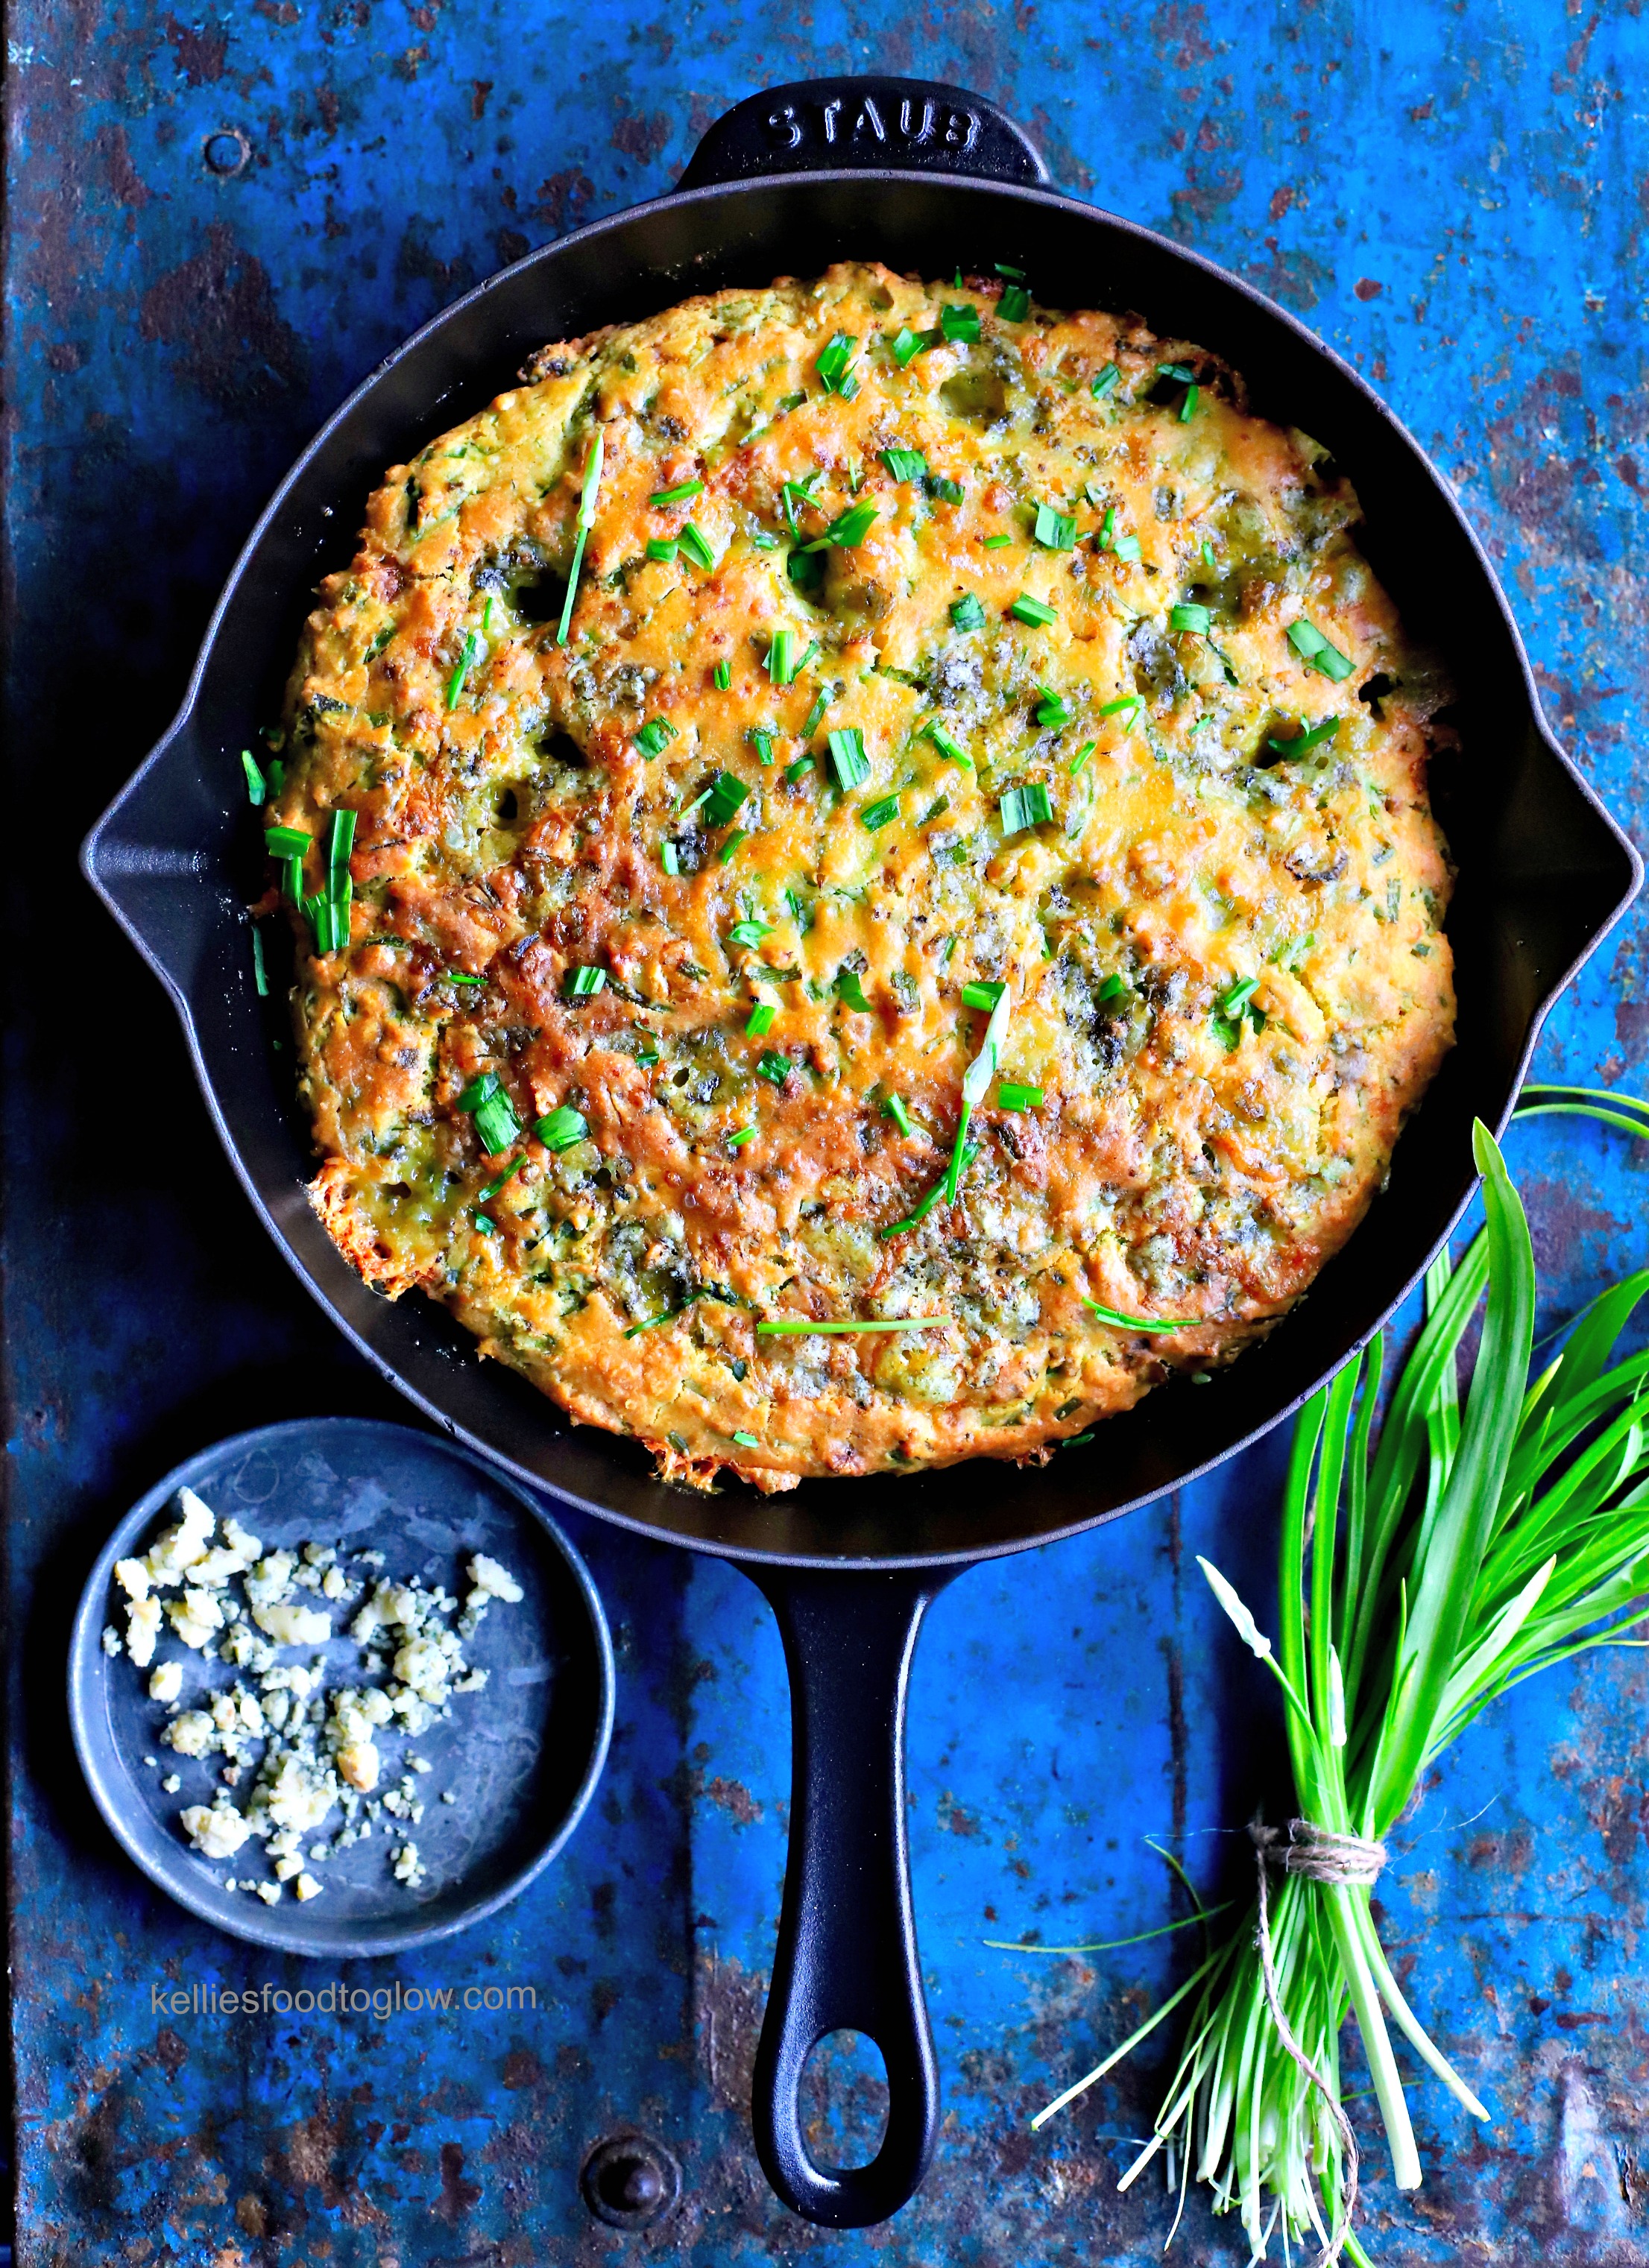 Punchy wild garlic and umami-rich Roquefort #cheese elevate the humble Southern dinner table staple, #cornbread, to new heights. Tender of crumb and with oodles of savory flavour, this quick and #easy #bread goes with stews, chillies, breakfast eggs and more. #wildgarlic